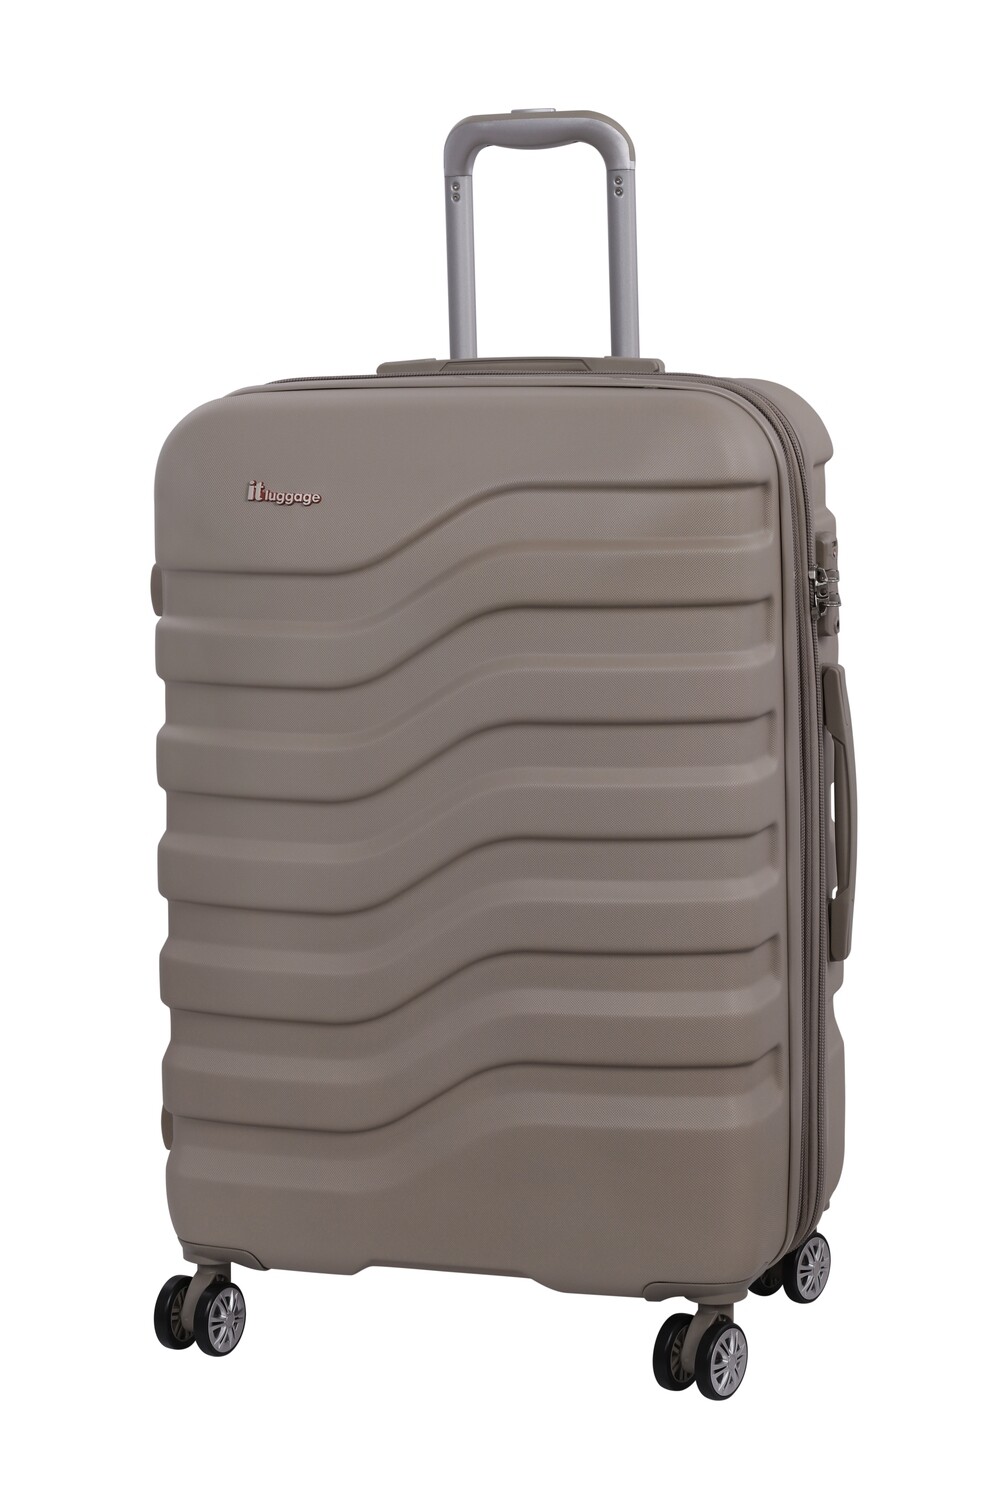 IT LUGGAGE SLIDER 26" STRONG TROLLEY COBBLESTONE